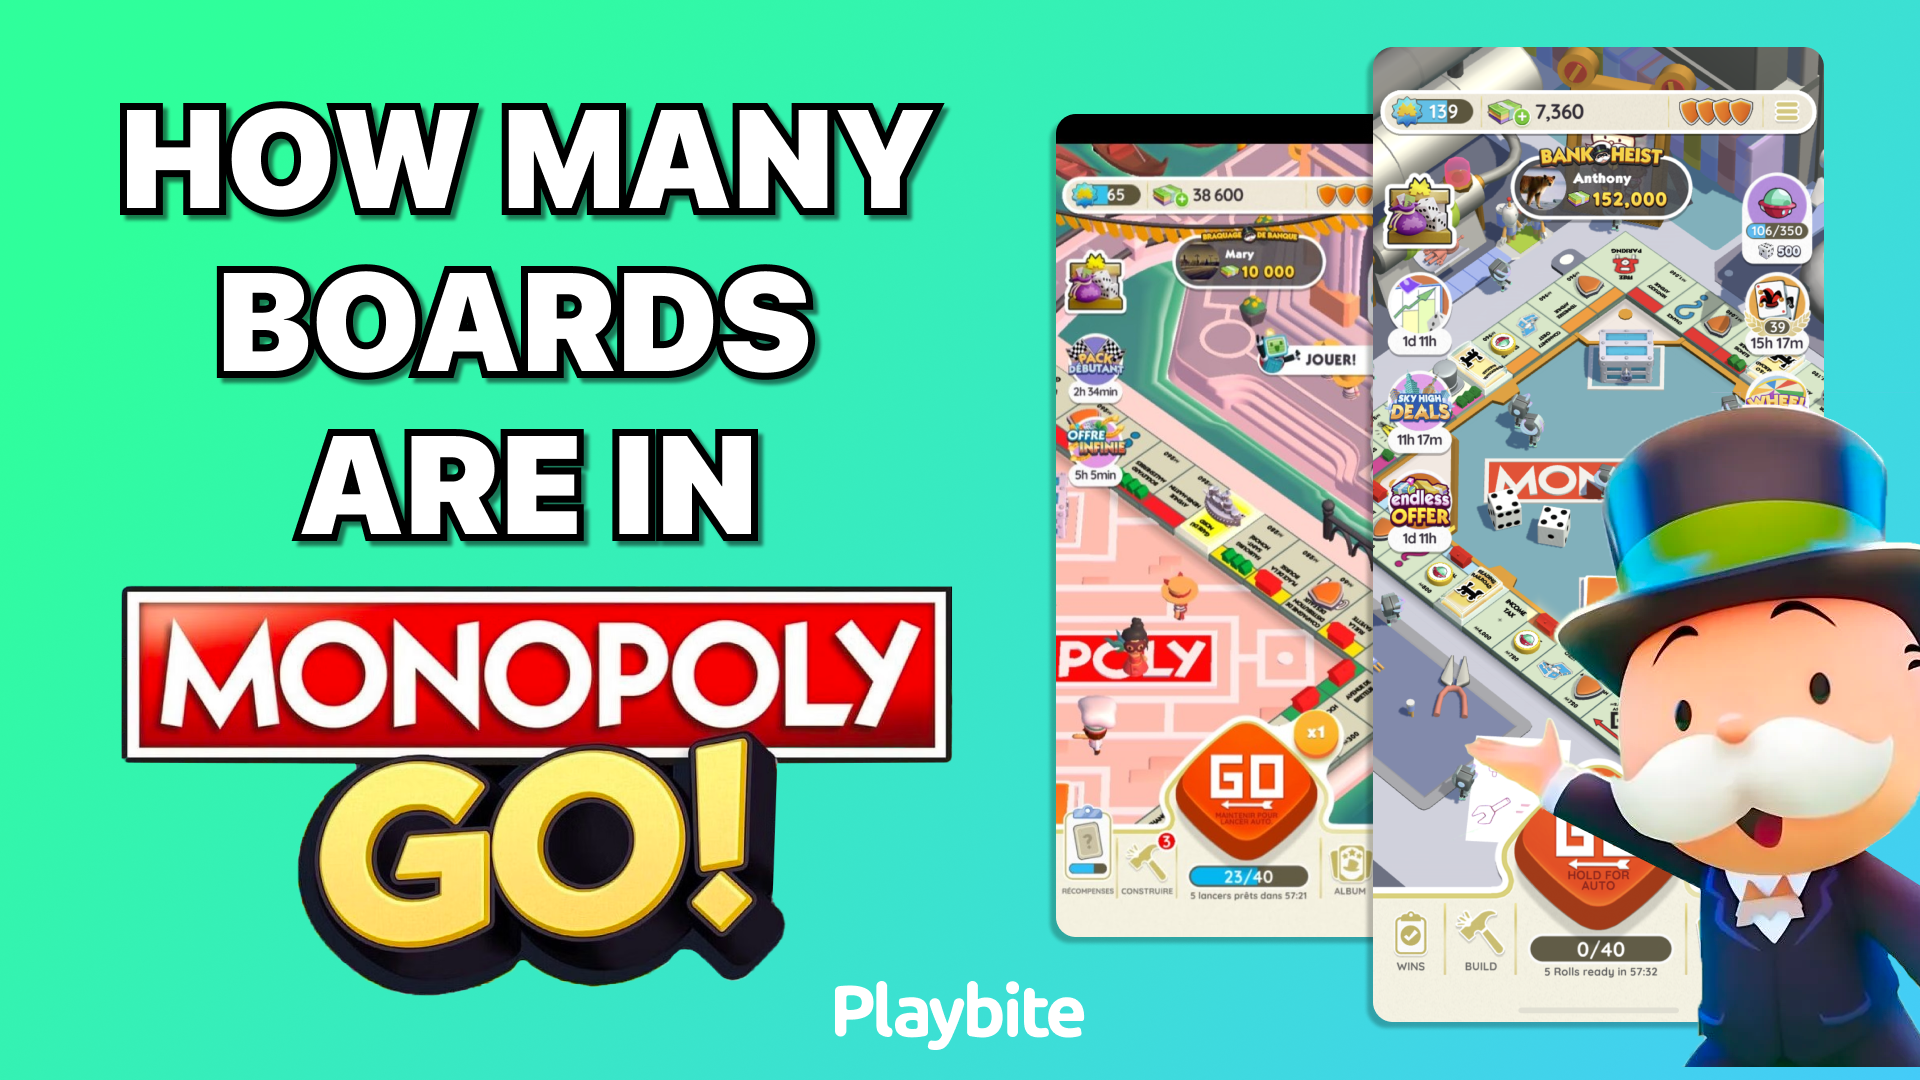 How Many Boards Are In Monopoly GO?